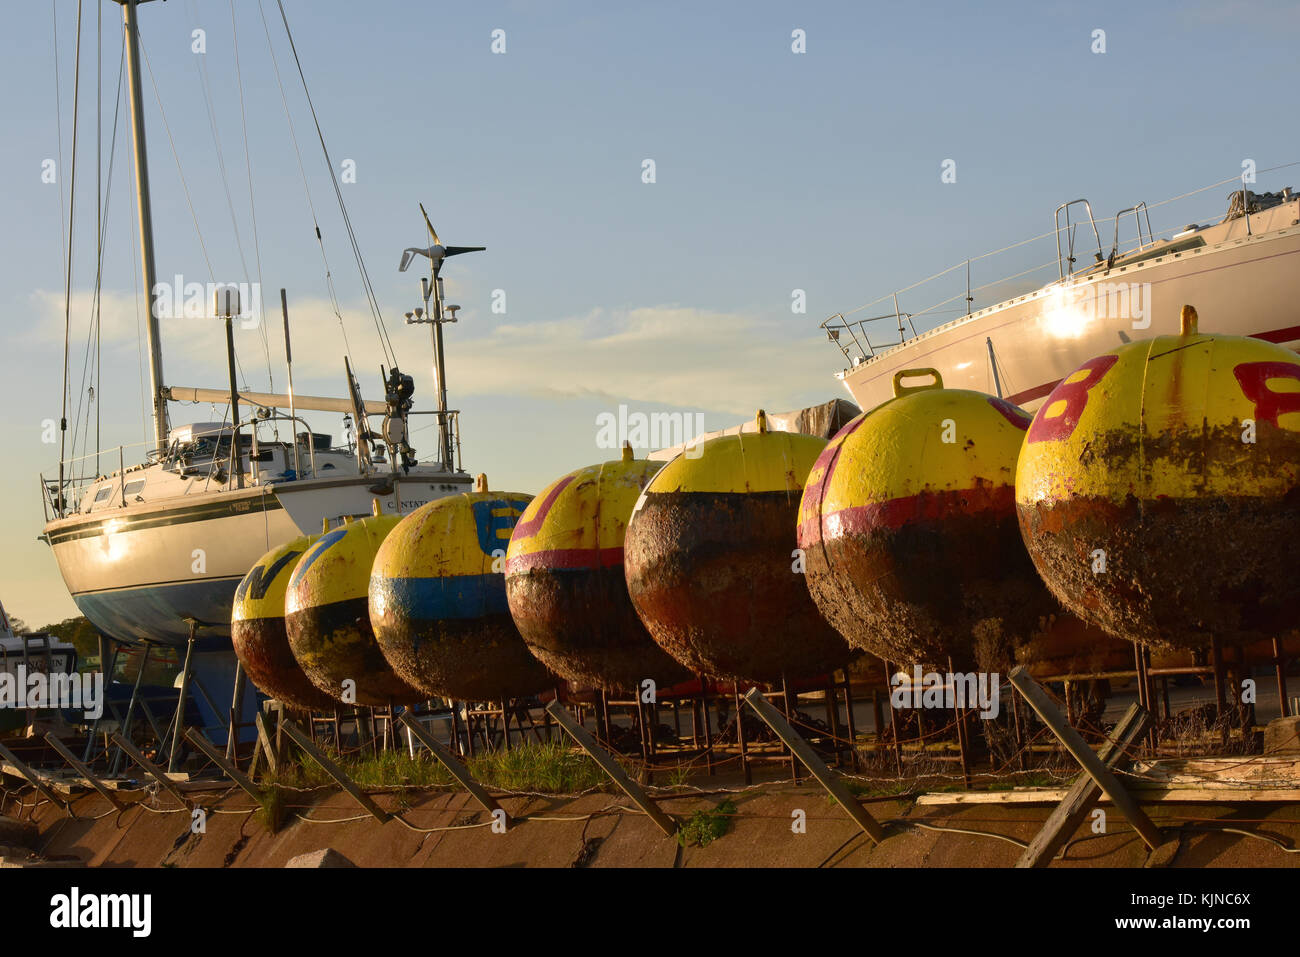 A row or line of navigation buoys in a boatyard at bembridge on the Isle of Wight. Trinity house navigation and buoy laying next to yachts on hard. Stock Photo